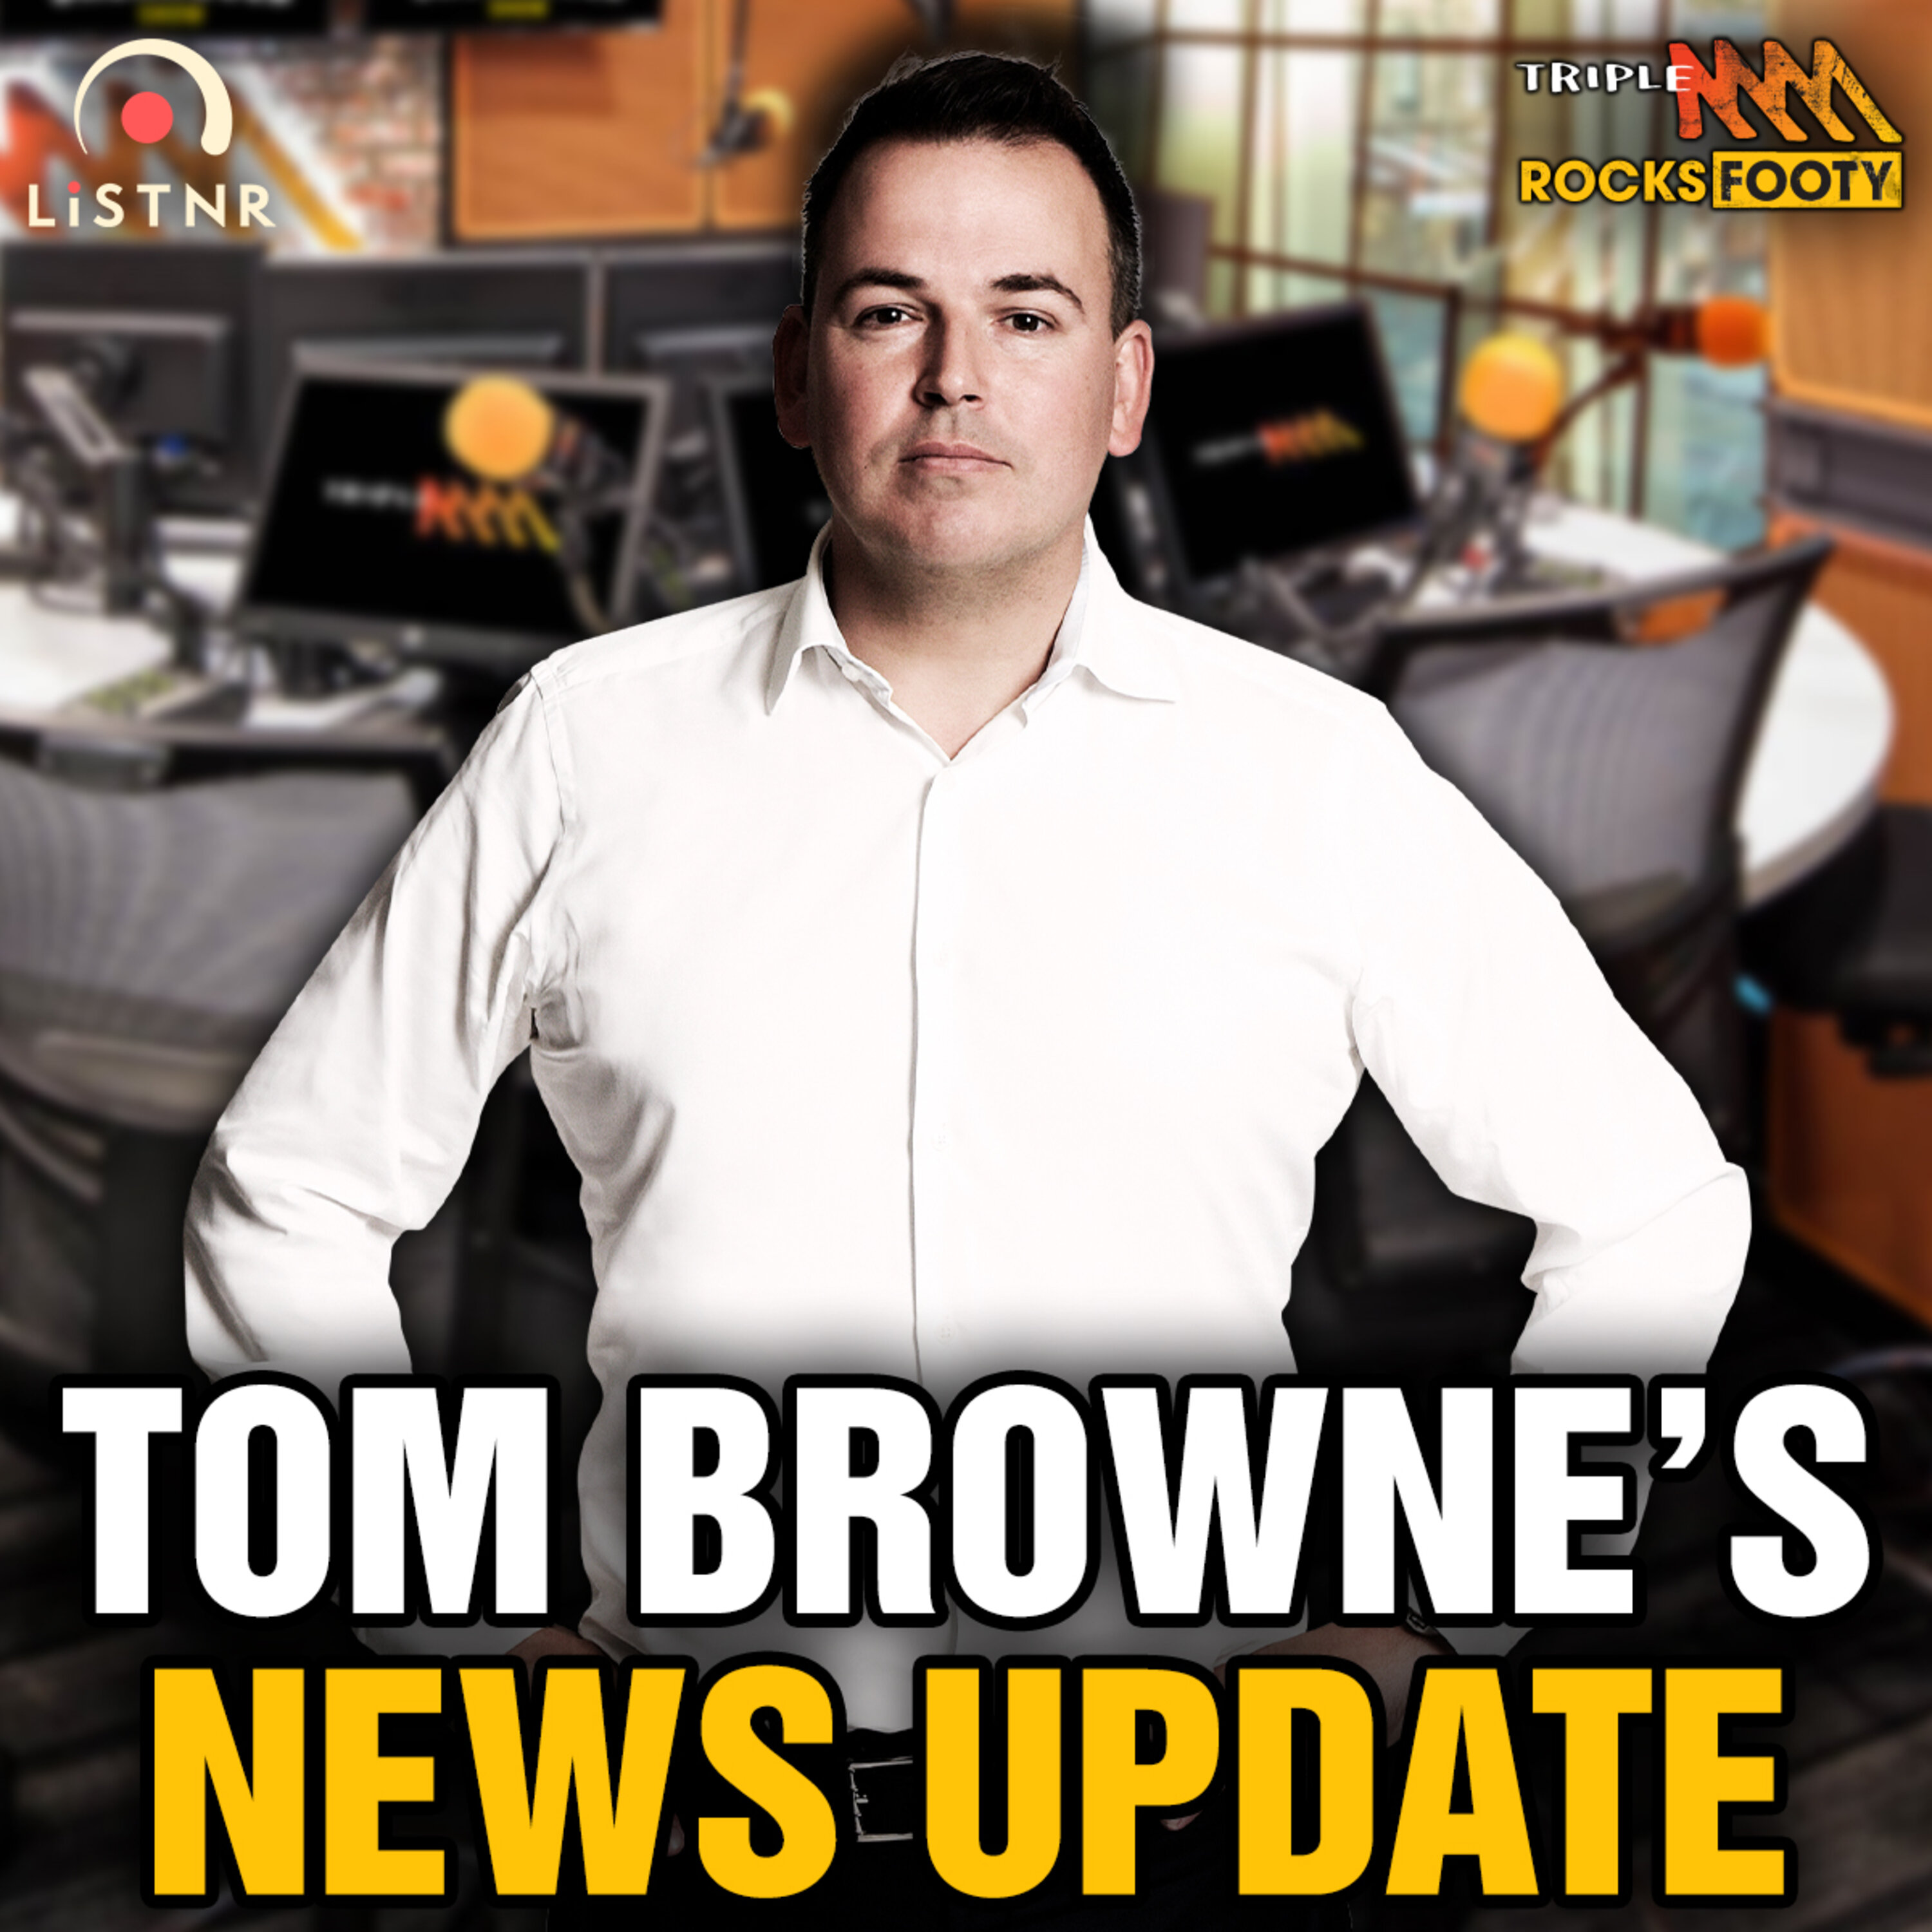 Tom Browne's News | Tasmania set for the 19th licence, but who gets the 20th?, is Andrew Dillon a lock for the CEO job?, and an update on Mitch McGovern and Kozzy Pickett